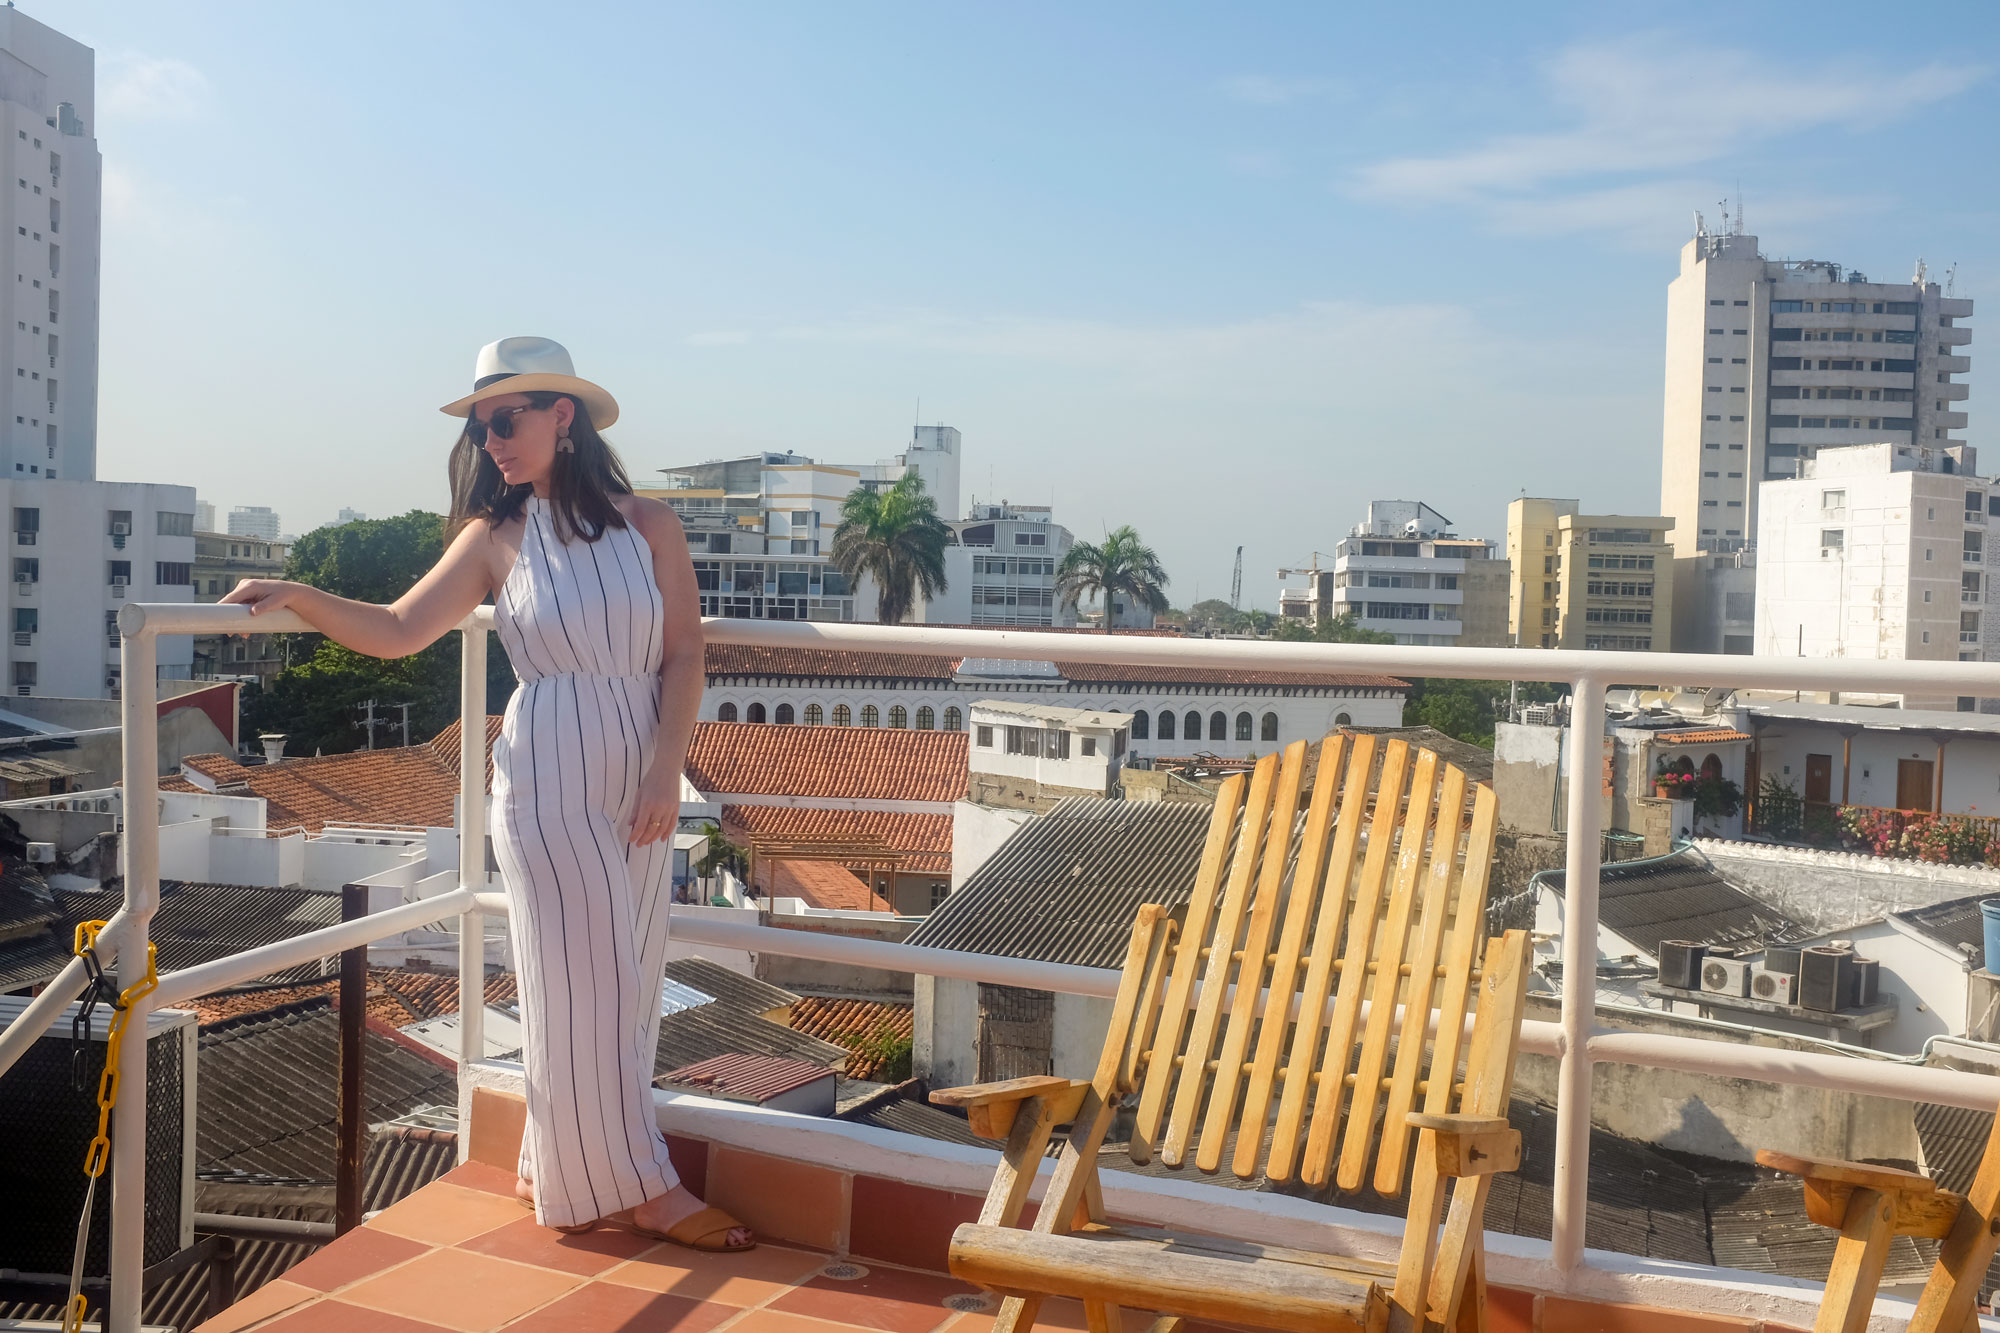 Krystal on the roof deck overlooking the city. She is wearing a white and blue striped jumpsuit, with a Panama hat, sunglasses, and brown sandals